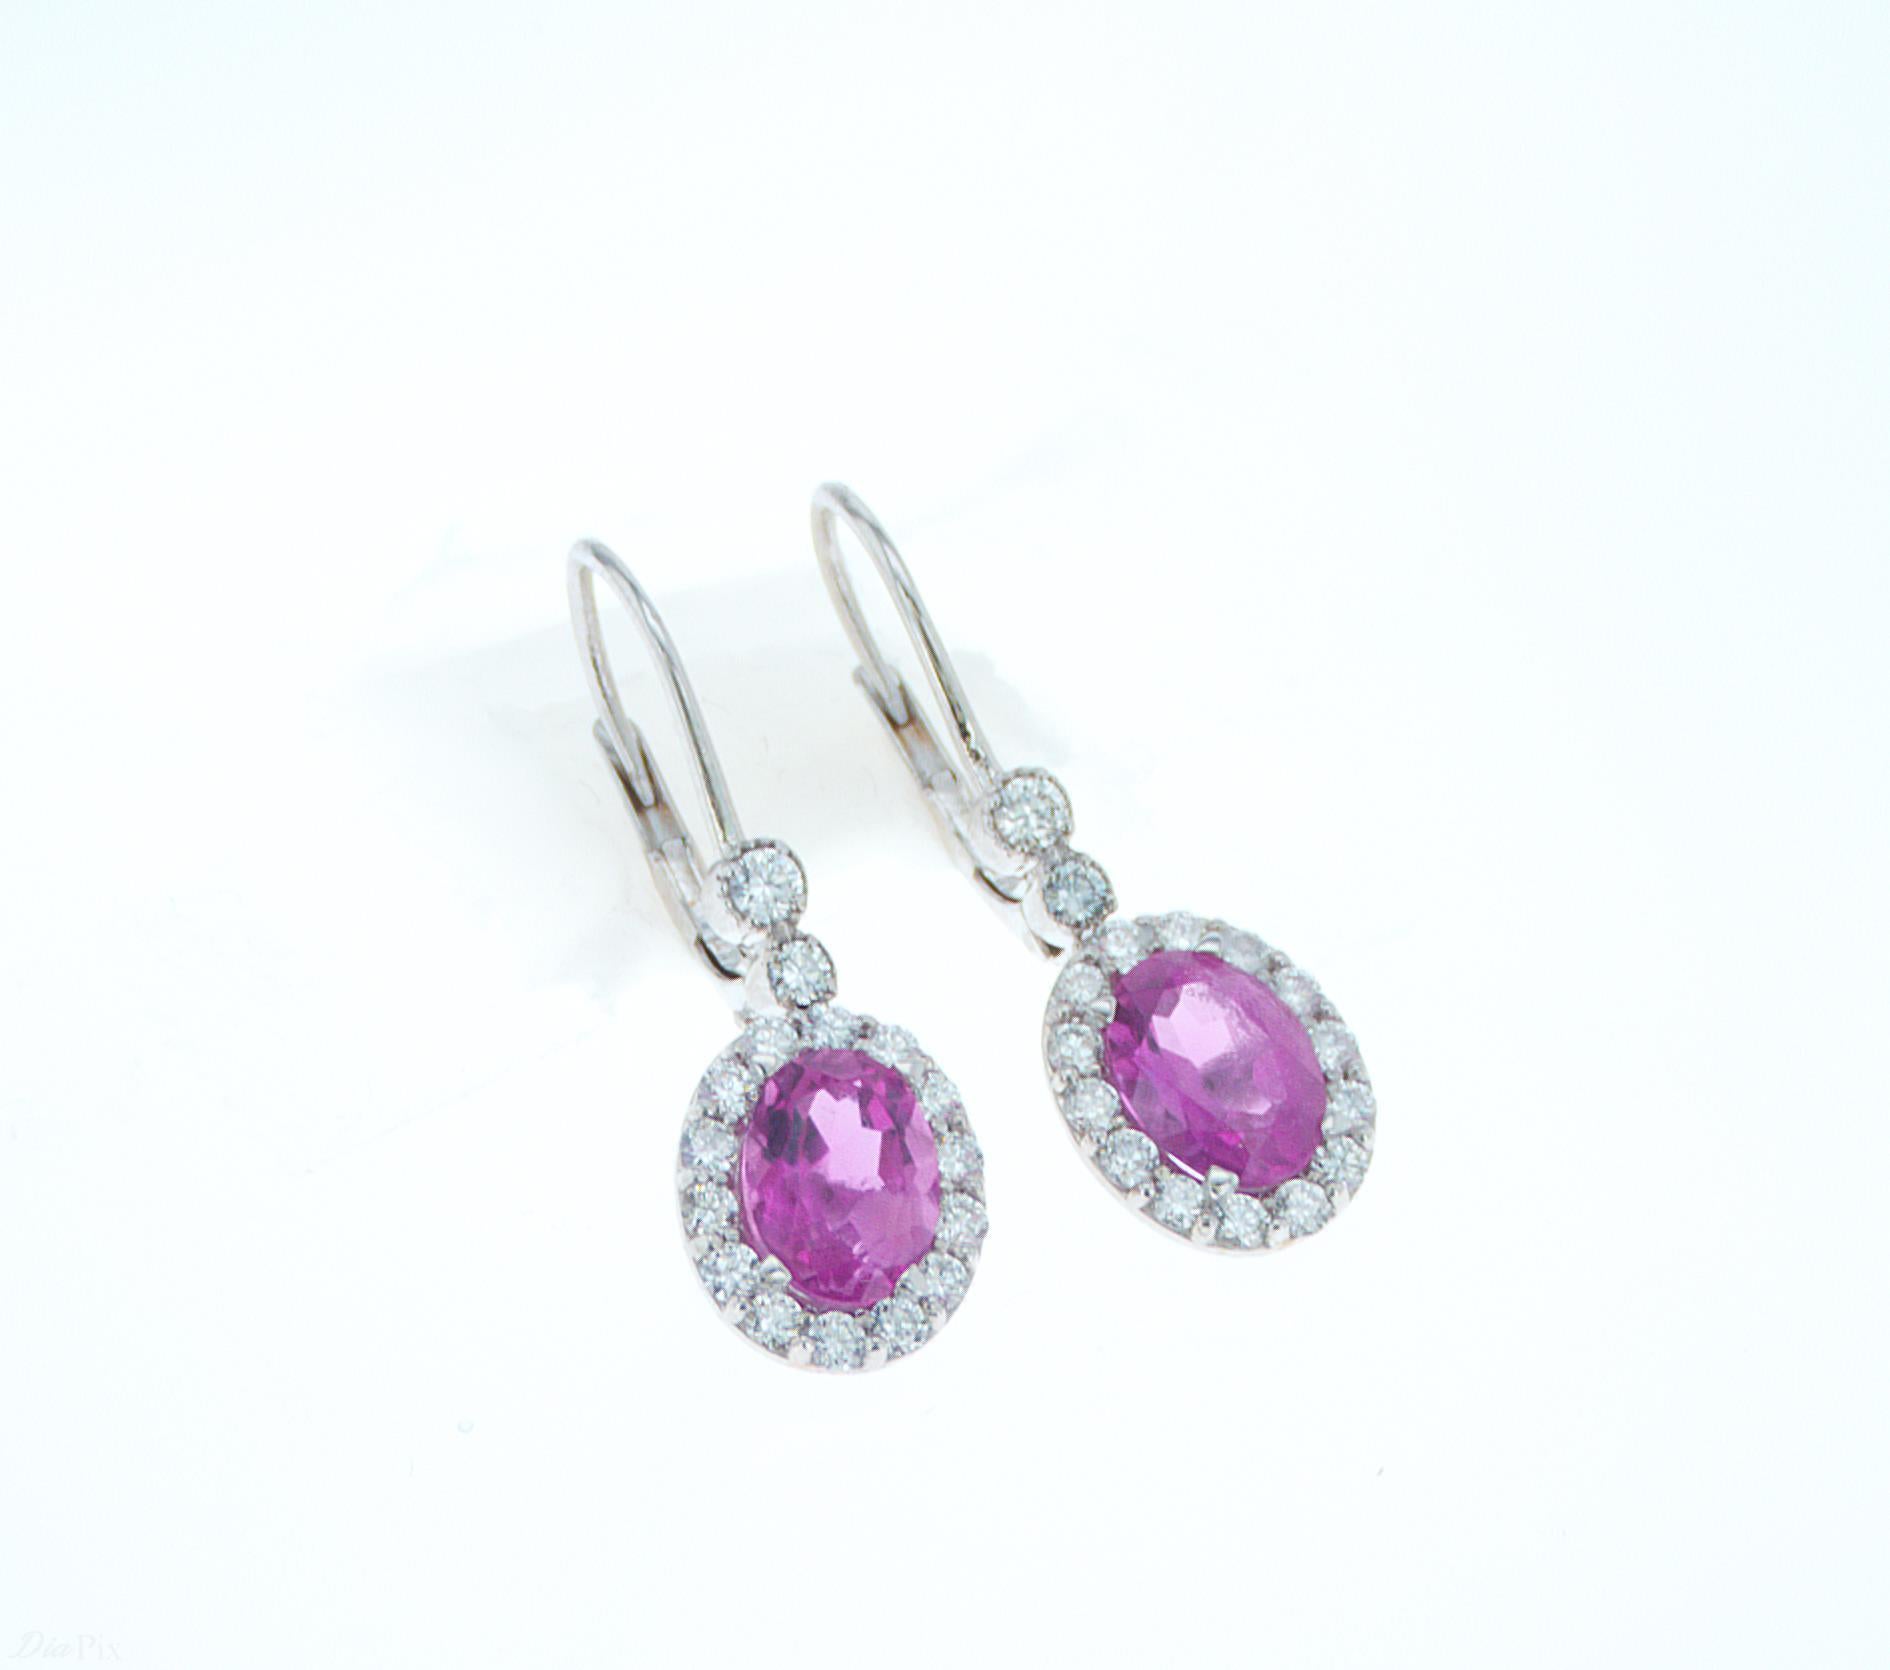 2.59 Carat TW Pink Tourmaline Earrings with Diamond Borders For Sale 1